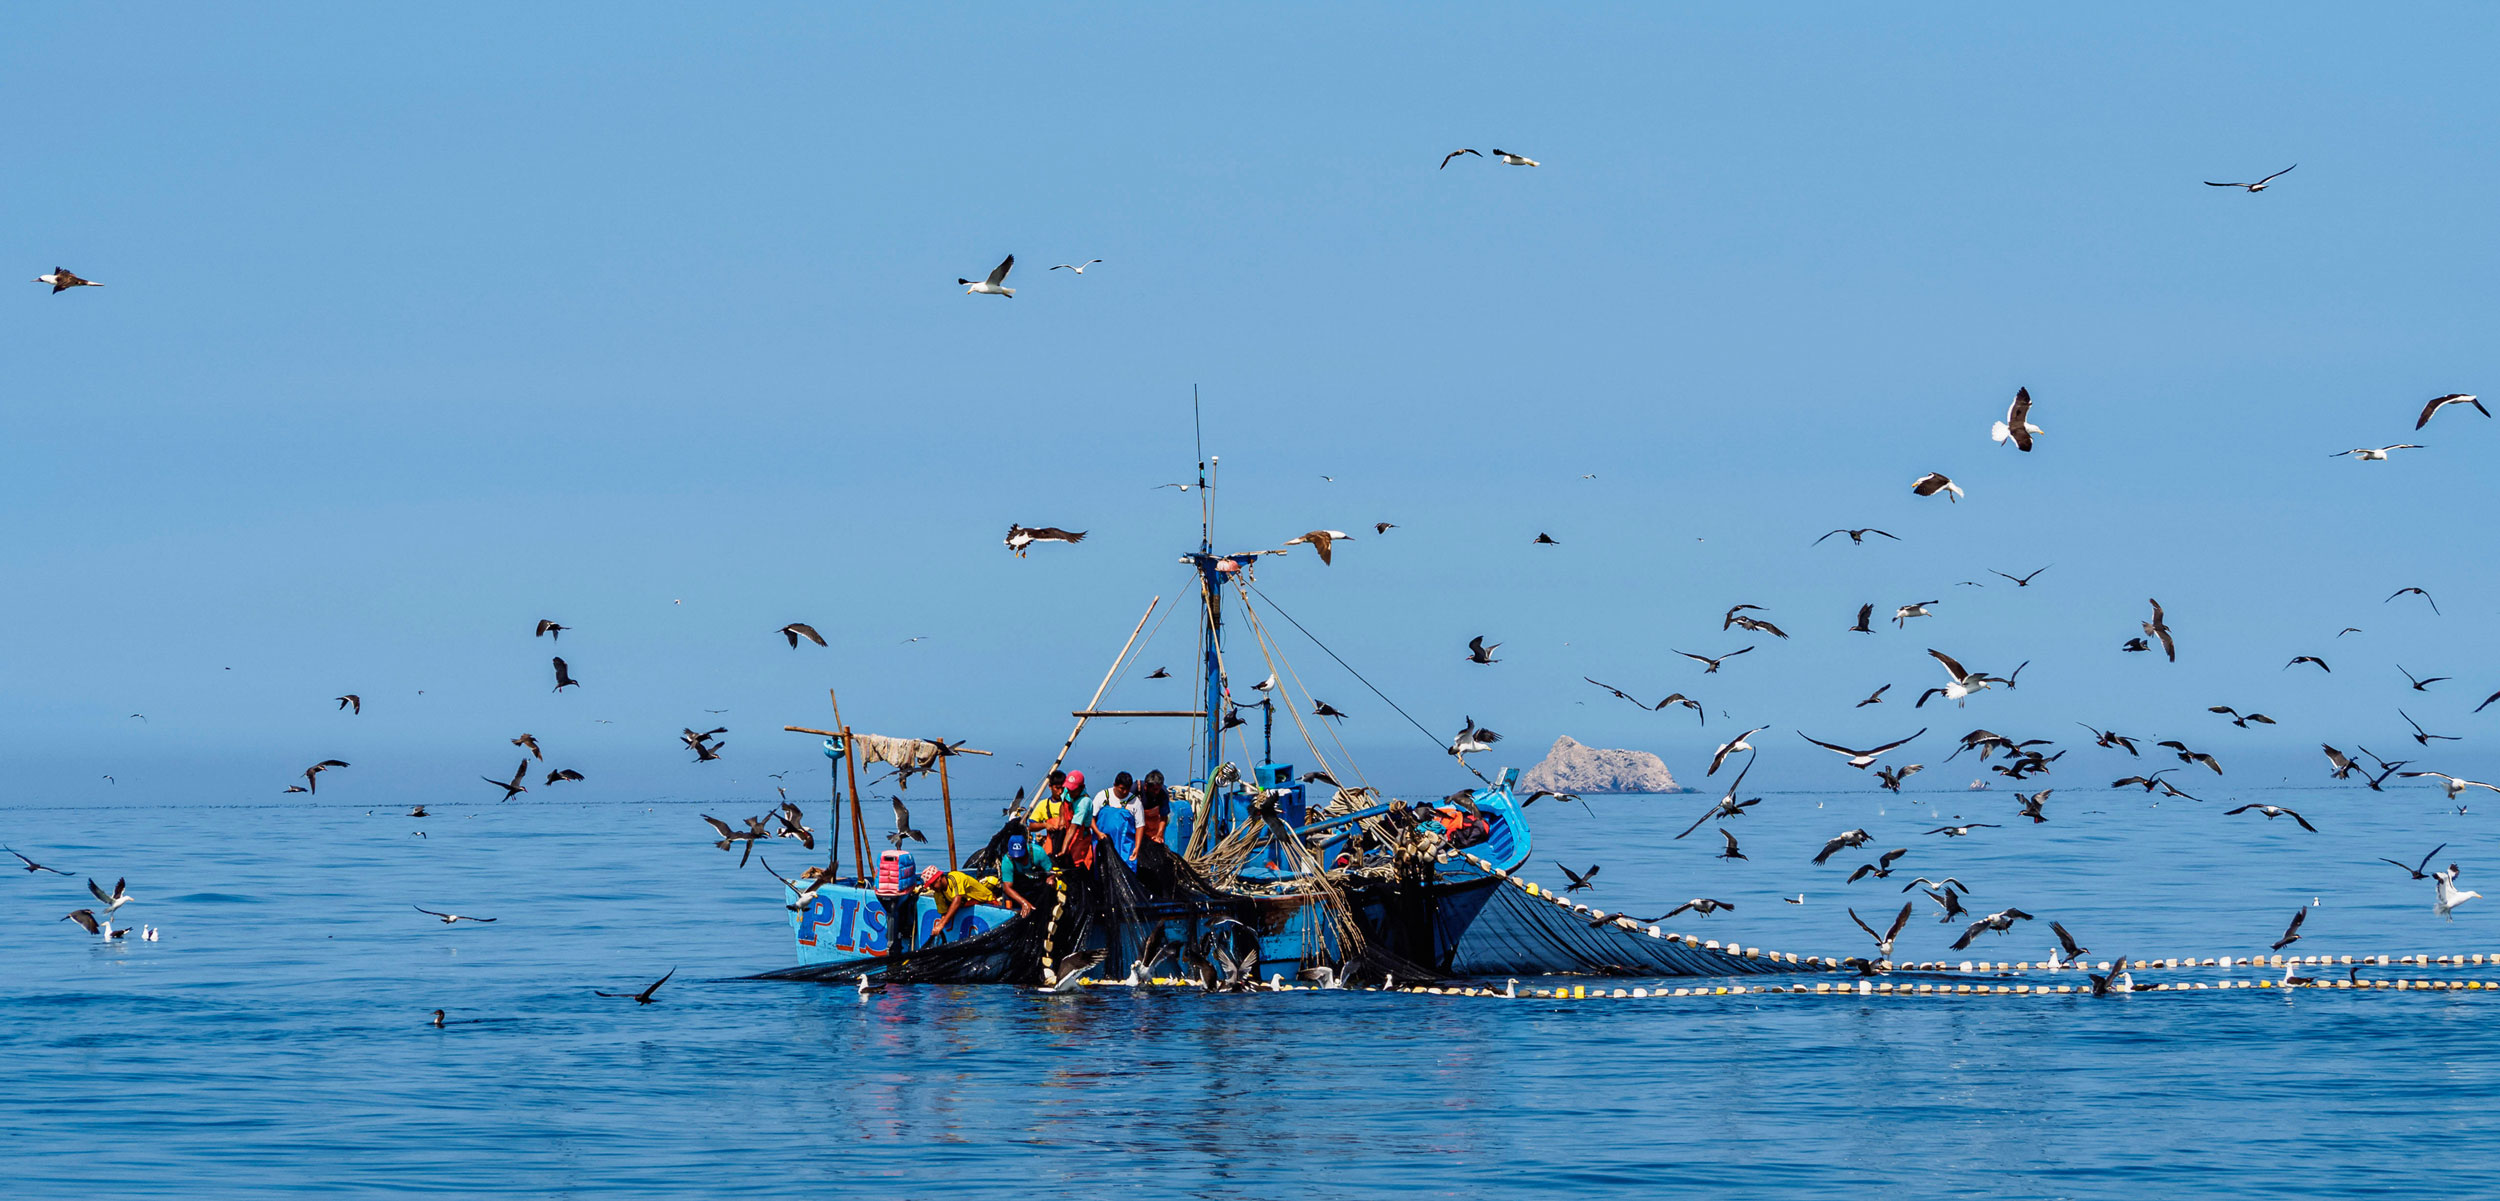 Boat in ocean with fisherman onboard pulling up a net surrounded by birds.